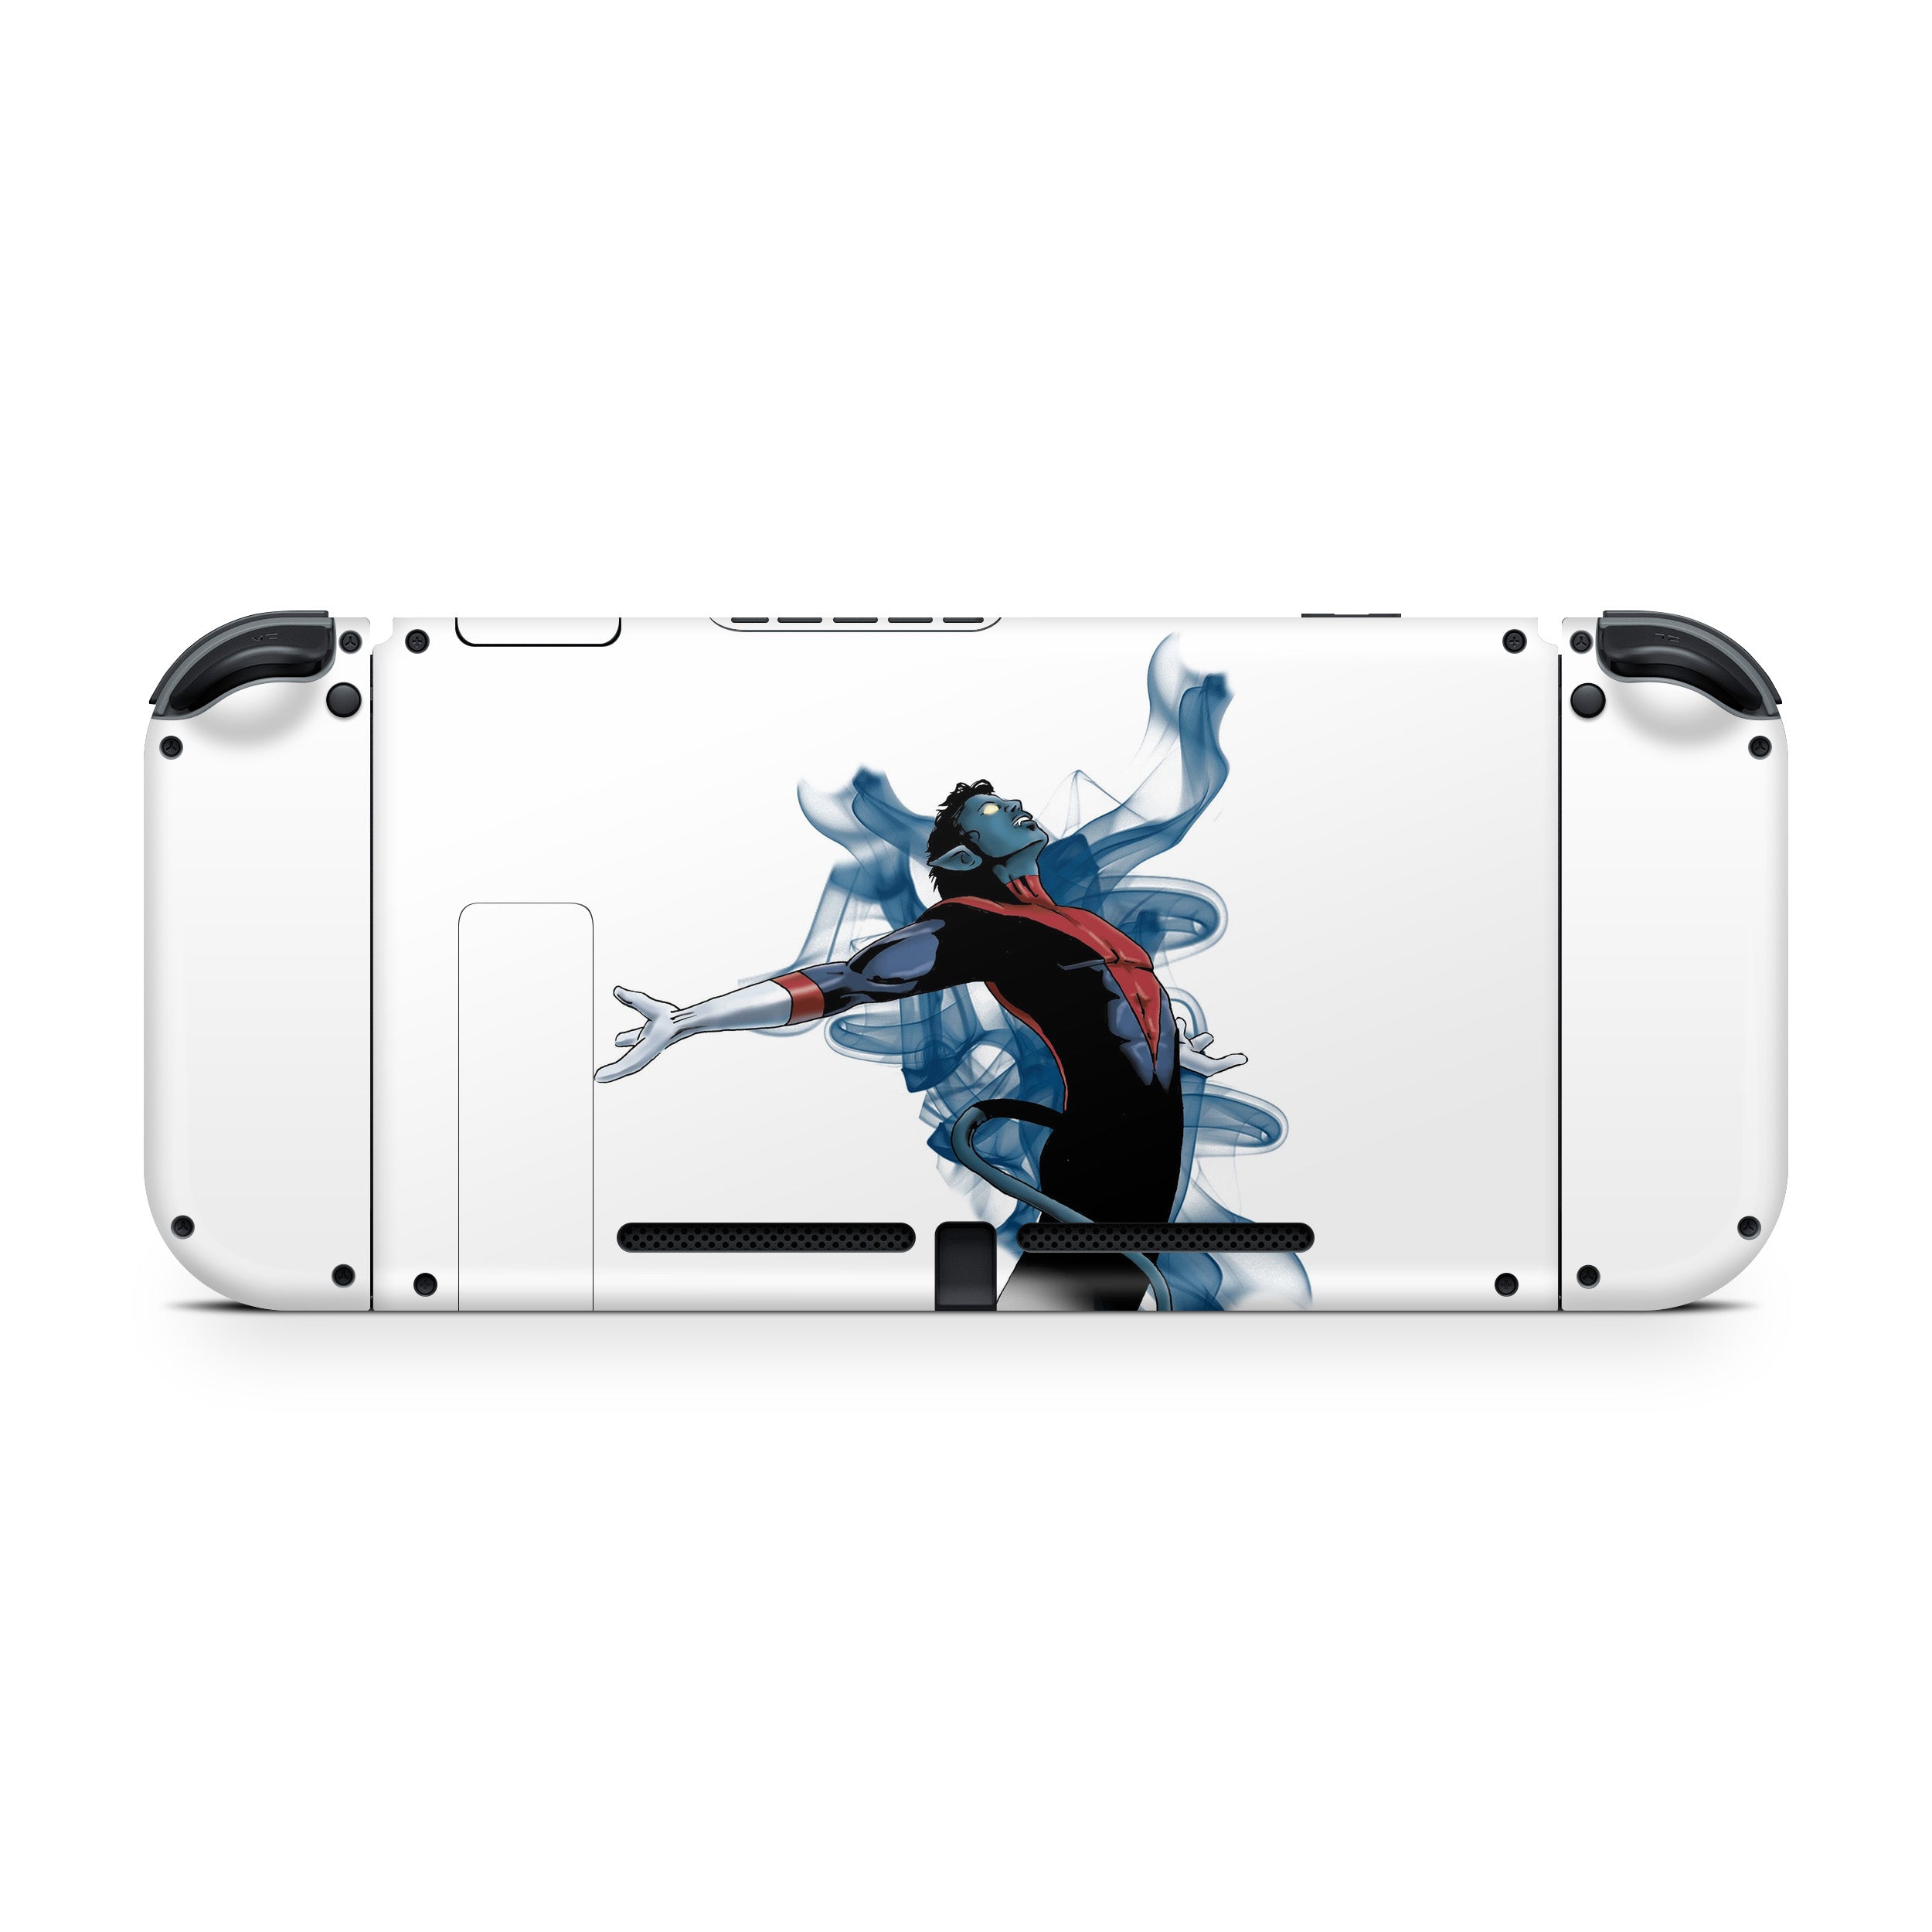 A video game skin featuring a Marvel X Men Nightcrawler design for the Nintendo Switch.